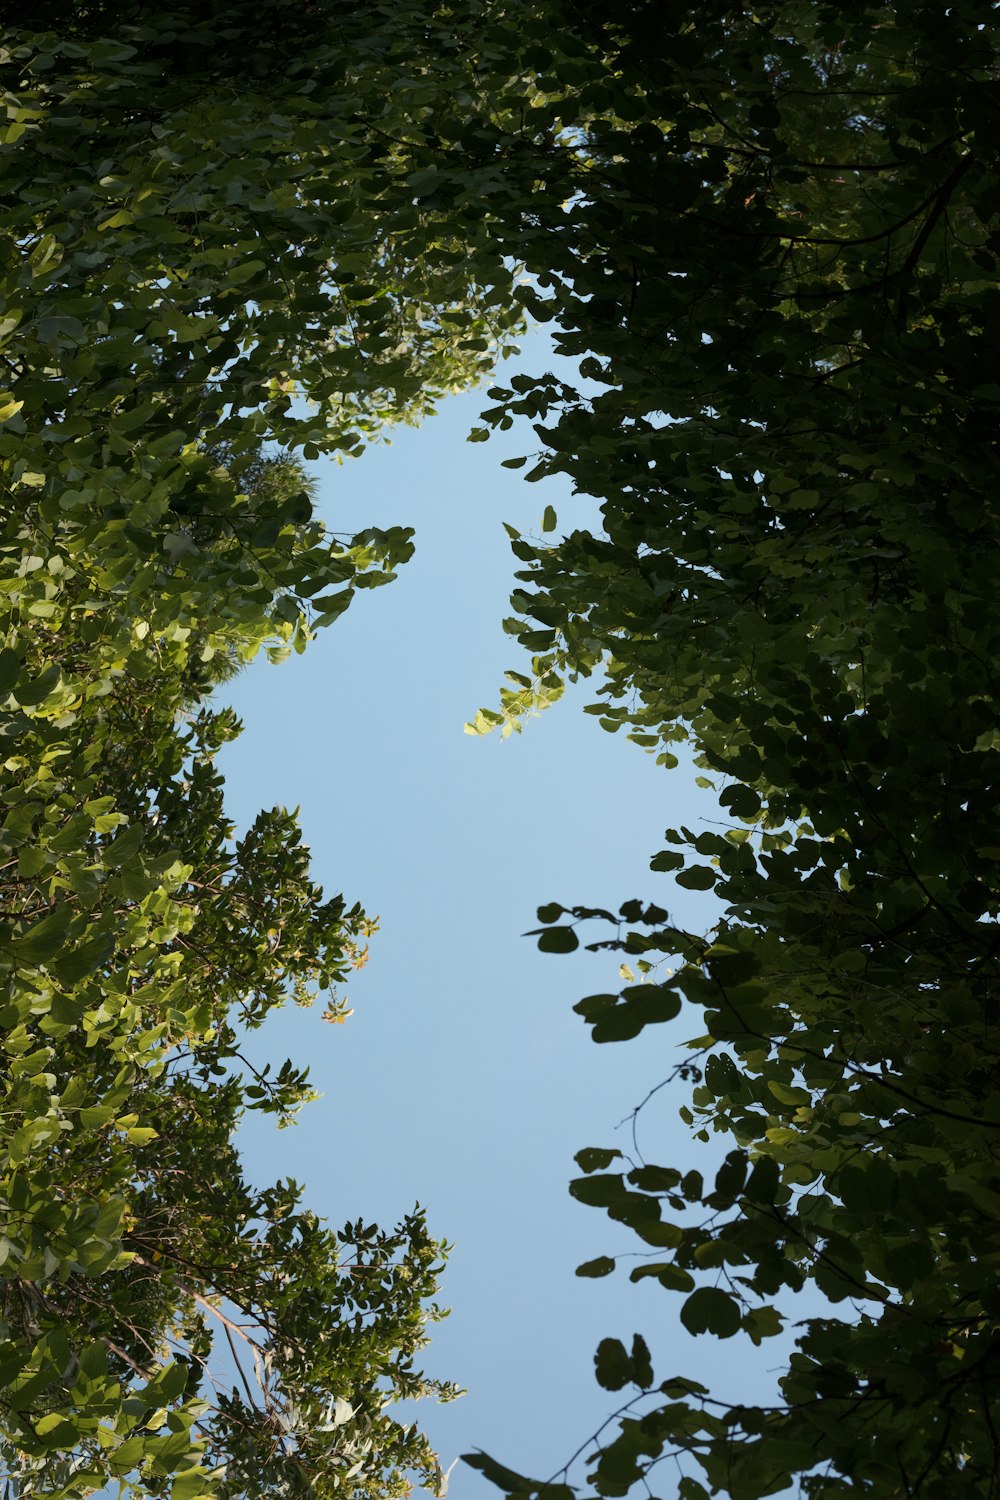 a reflection of trees in a puddle of water